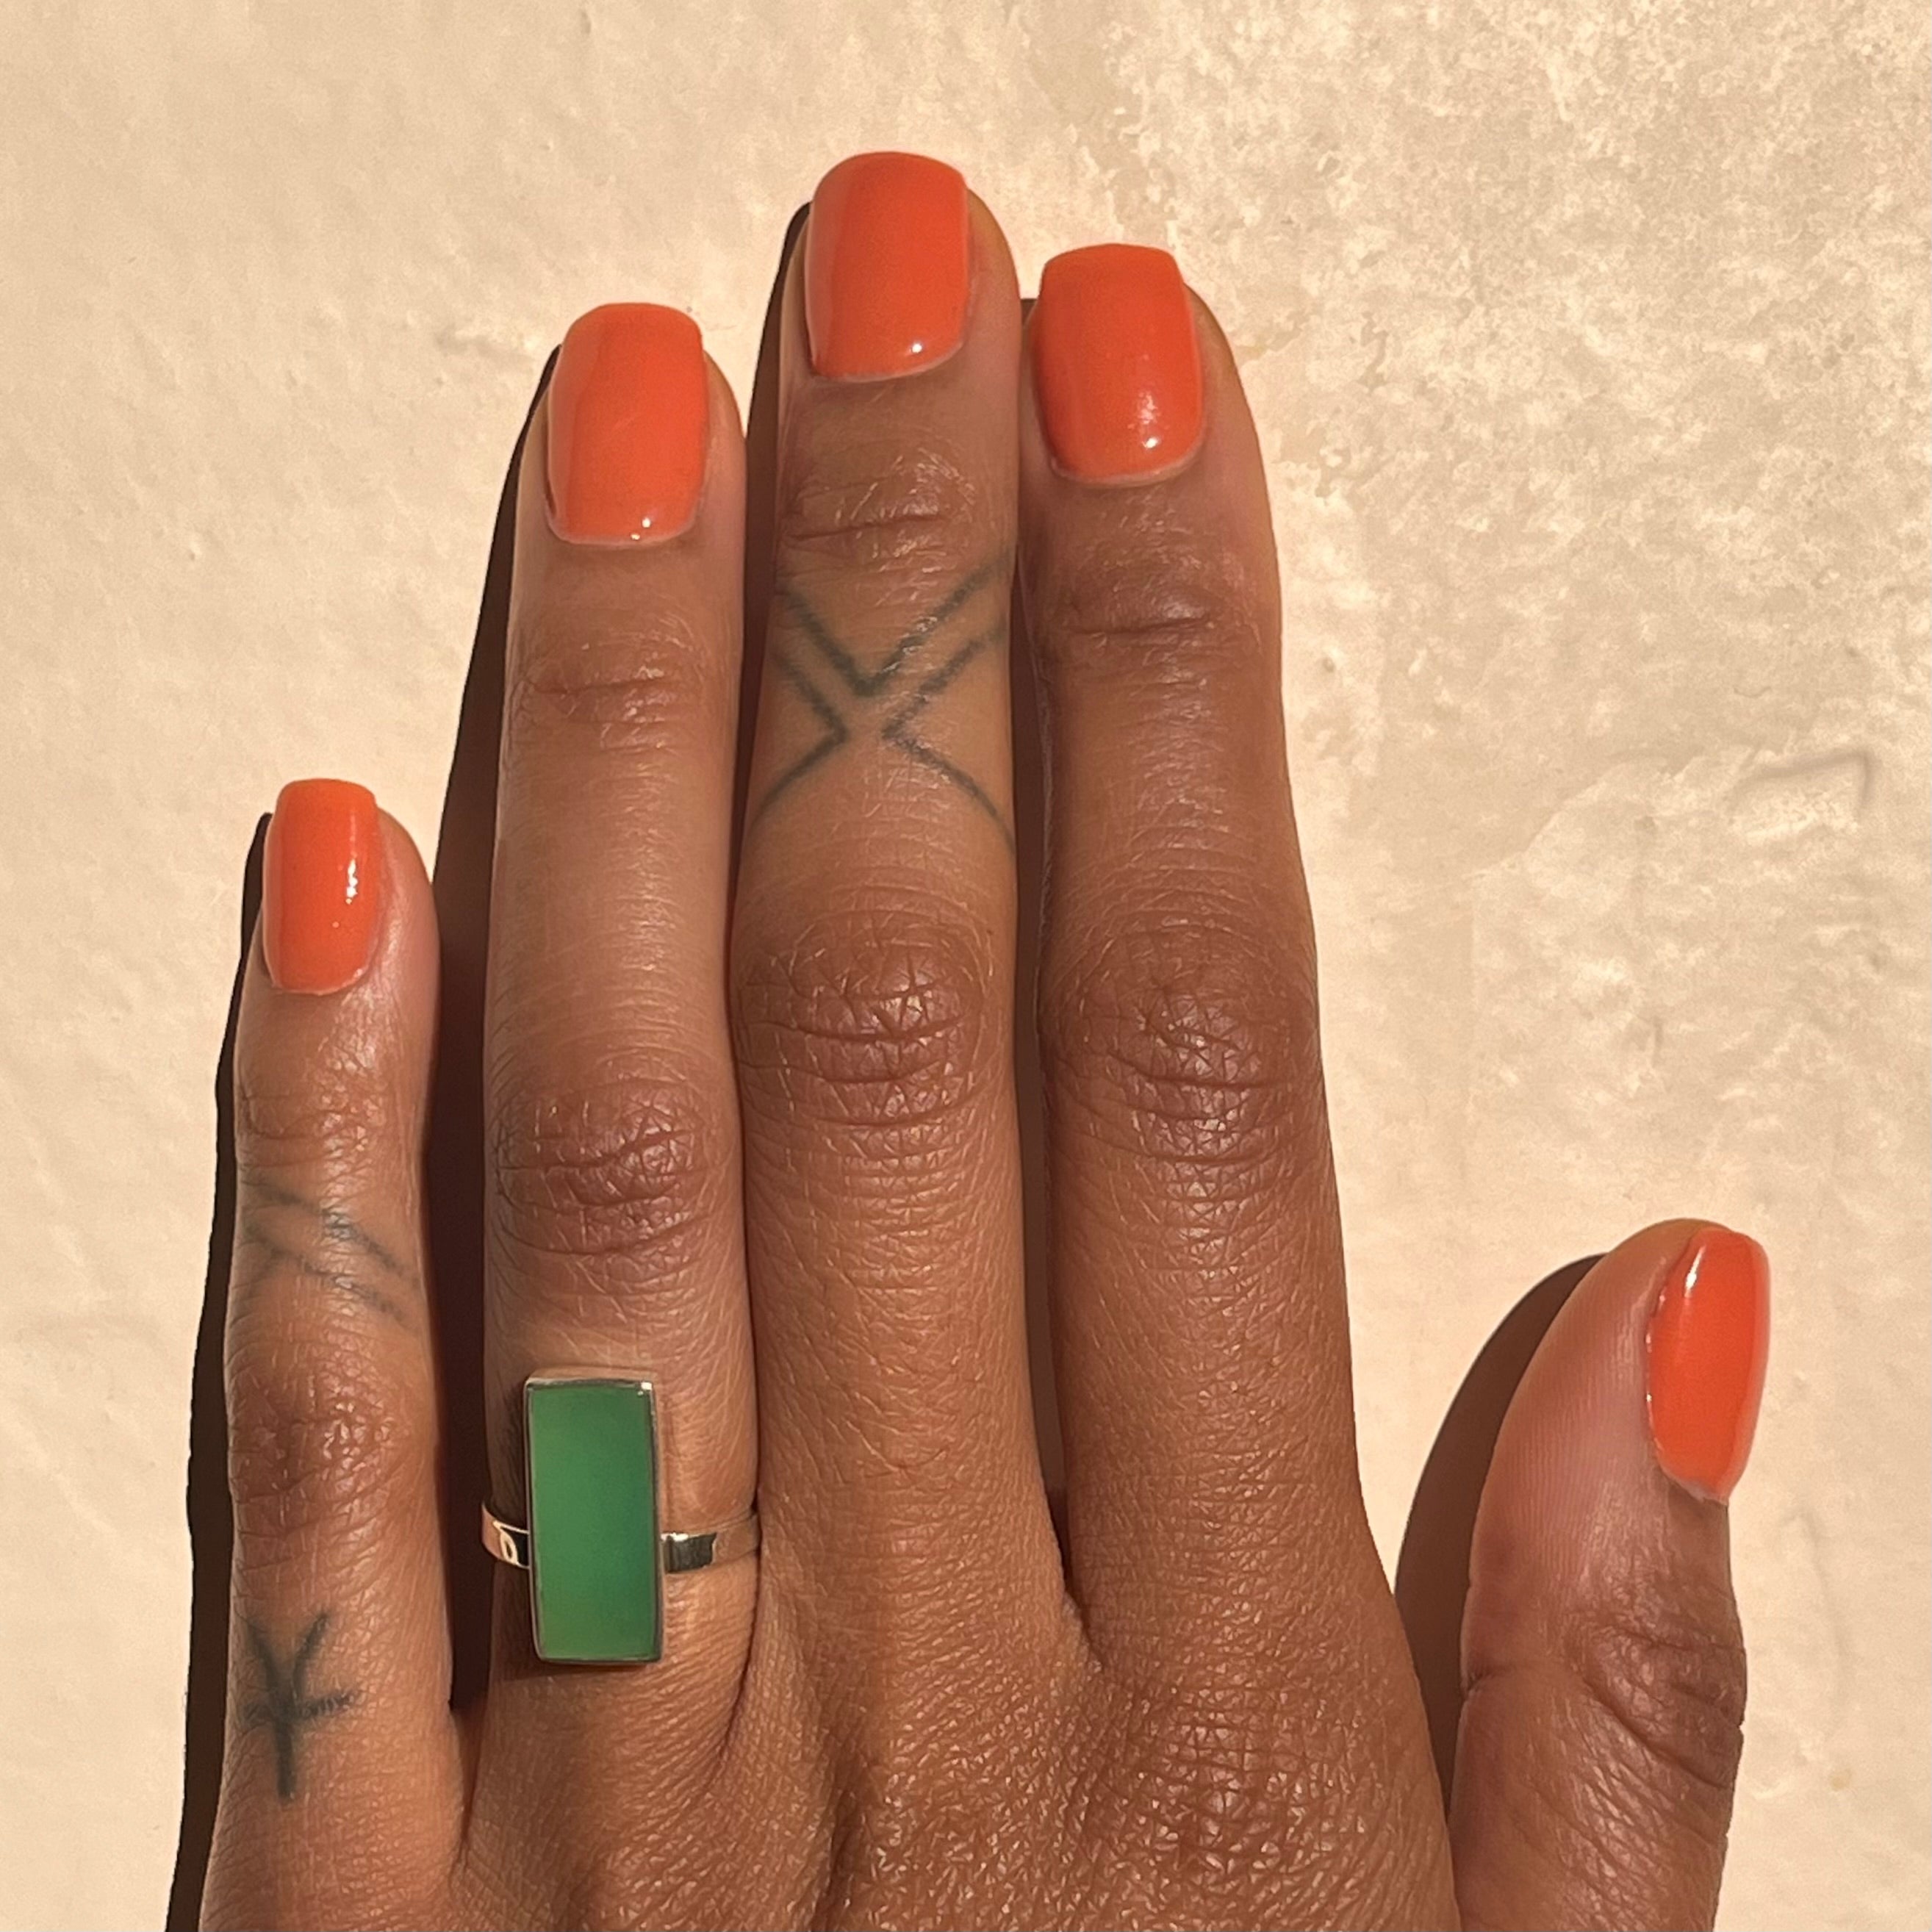 North/South Ring - Chrysoprase - Size 5